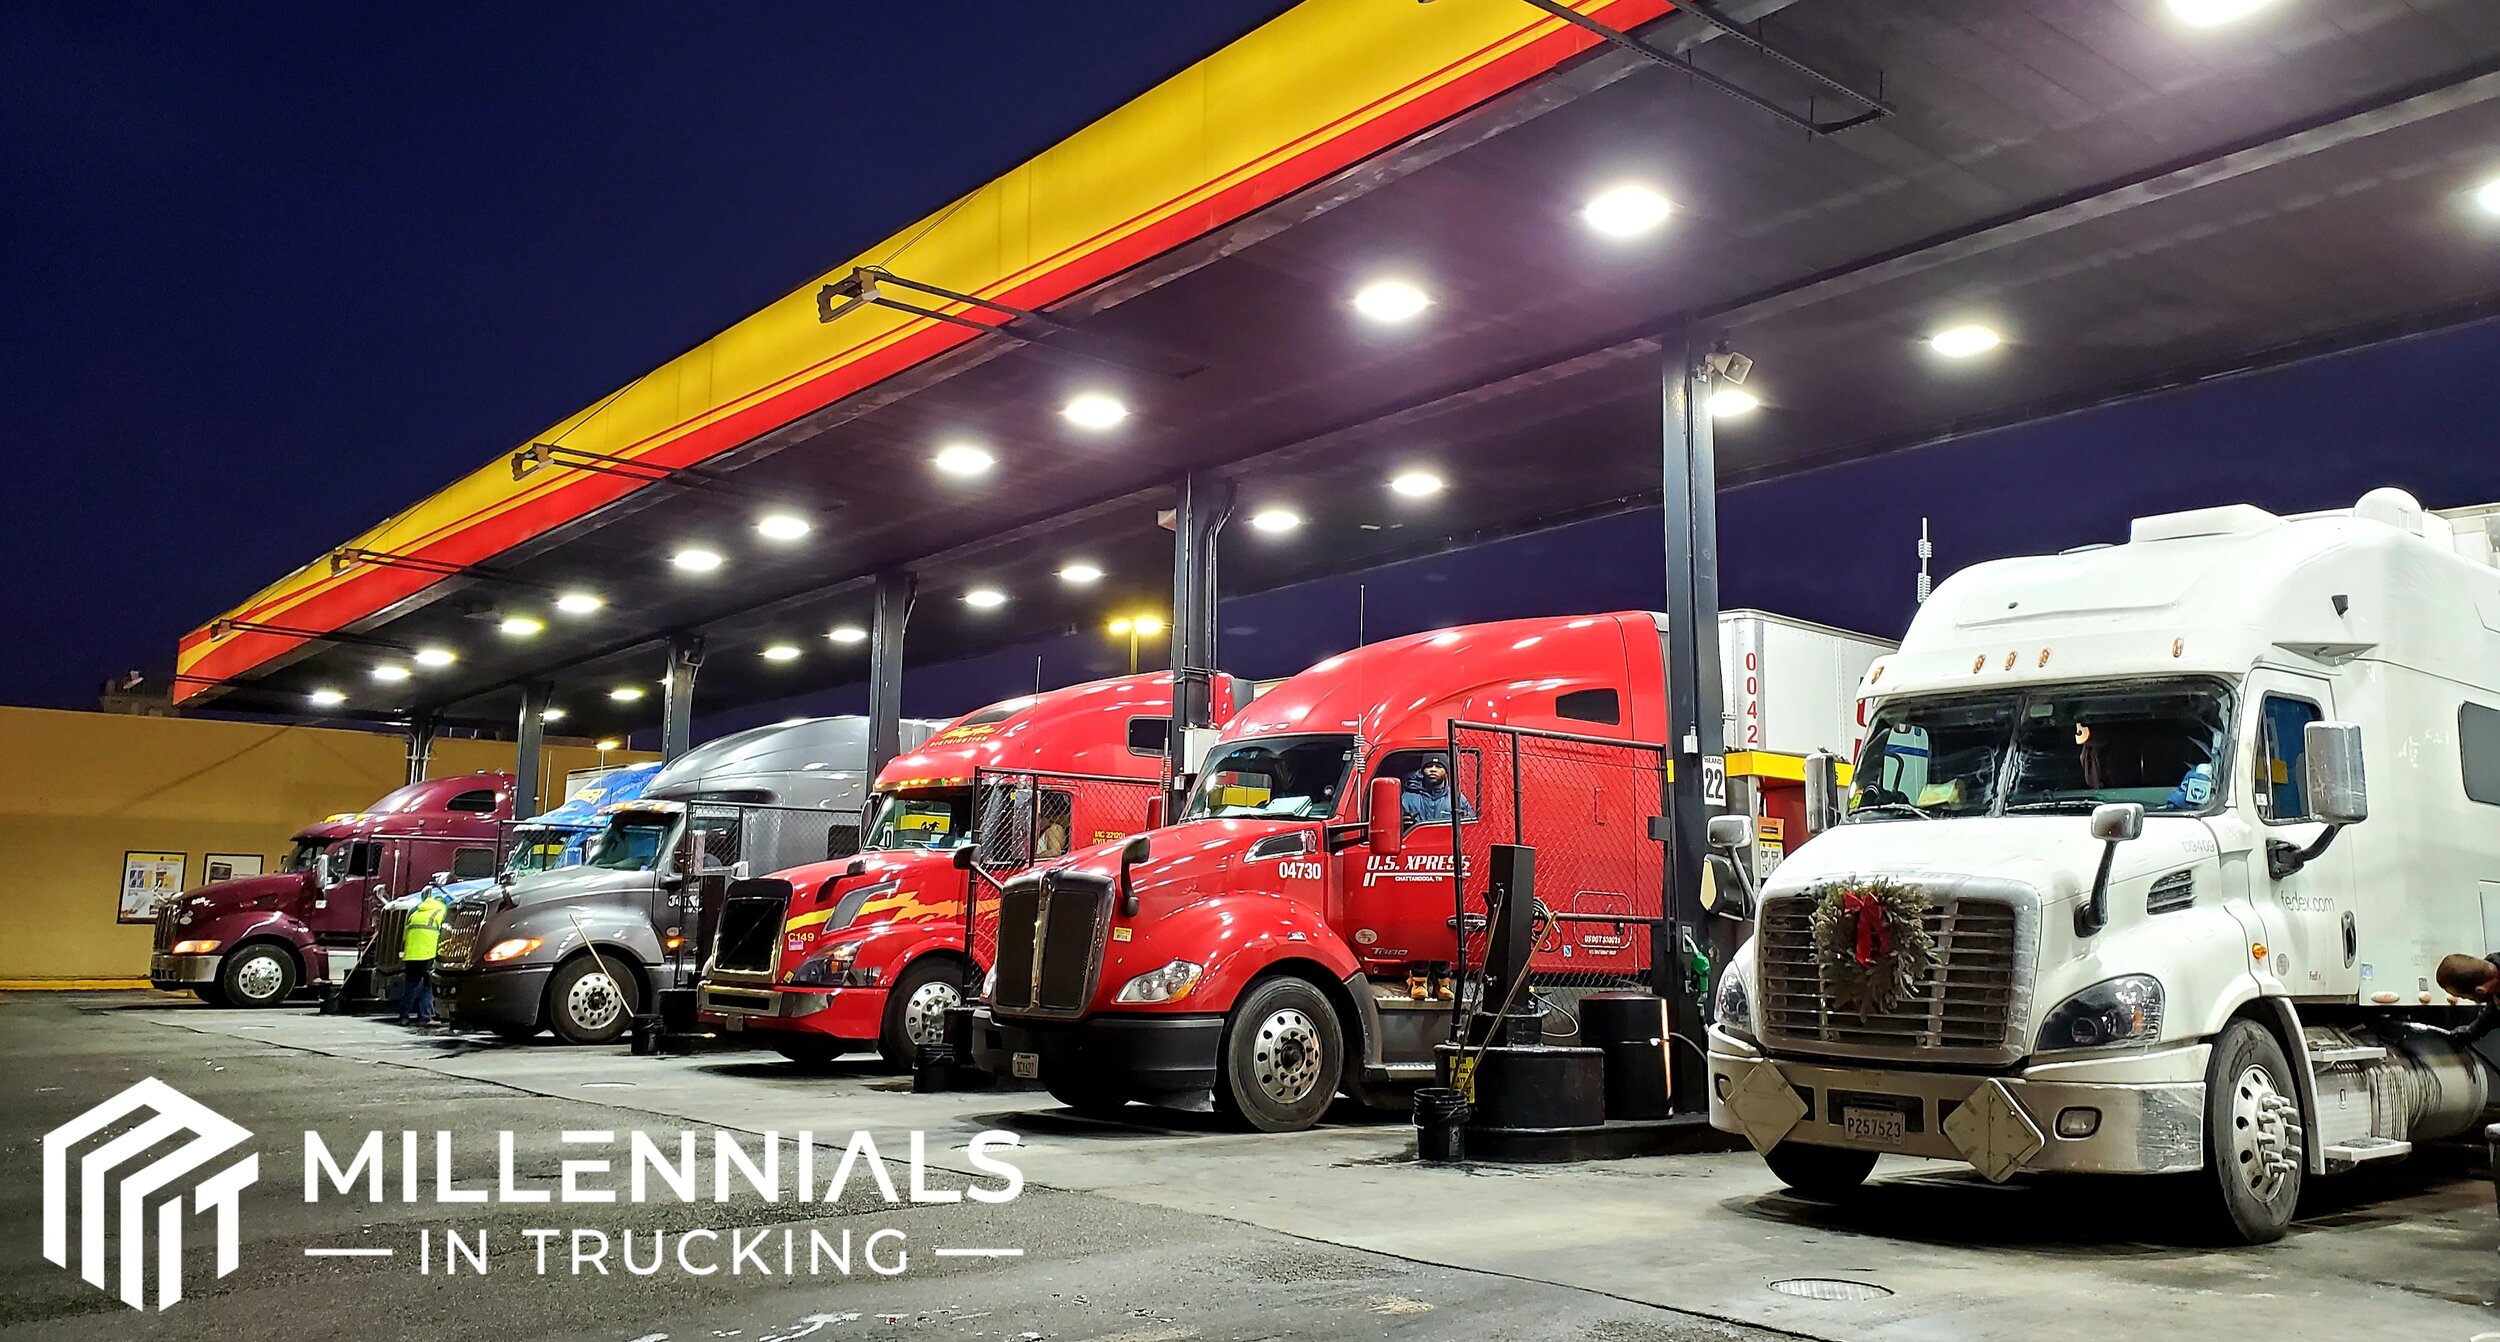 Truck Stops Guide: Amenities and Fun Facts